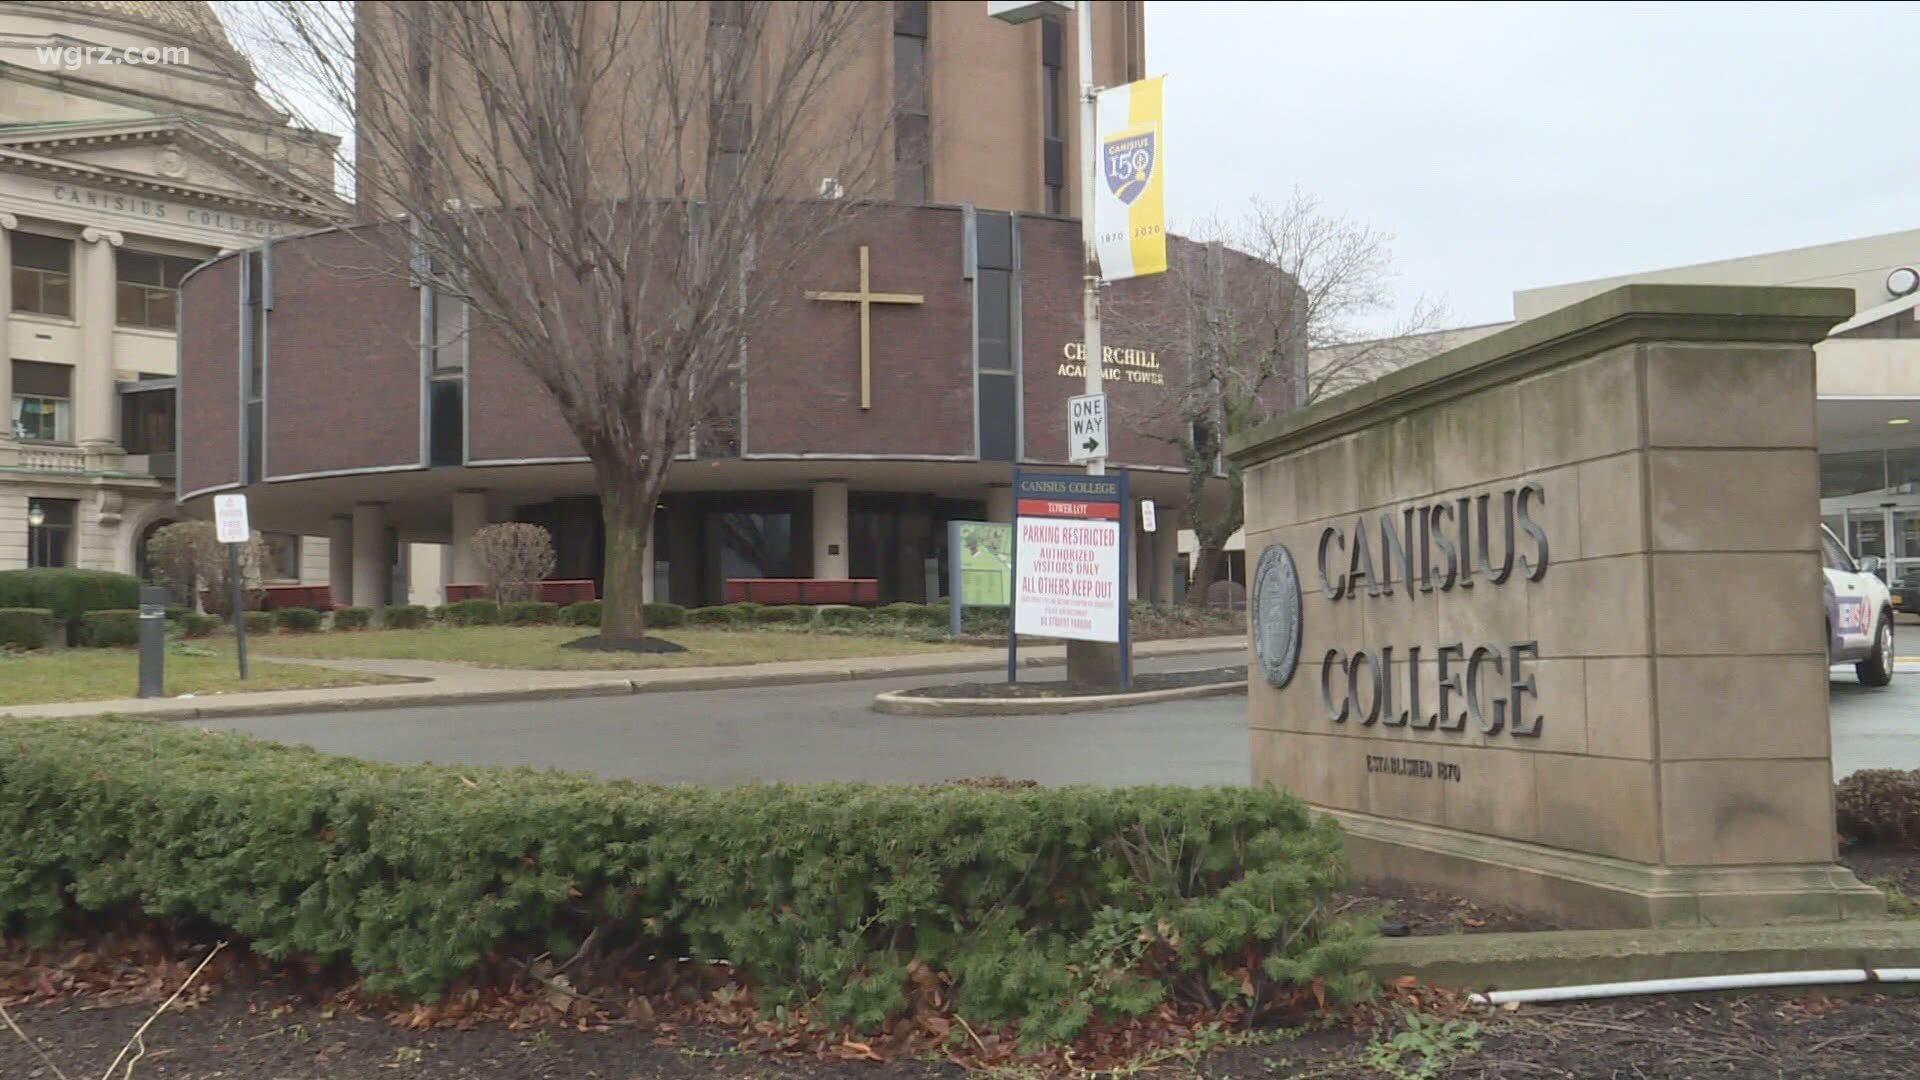 Three women, all former student-athletes at Canisius college have filed a federal lawsuit against the school. All three claim they were sexually assaulted.